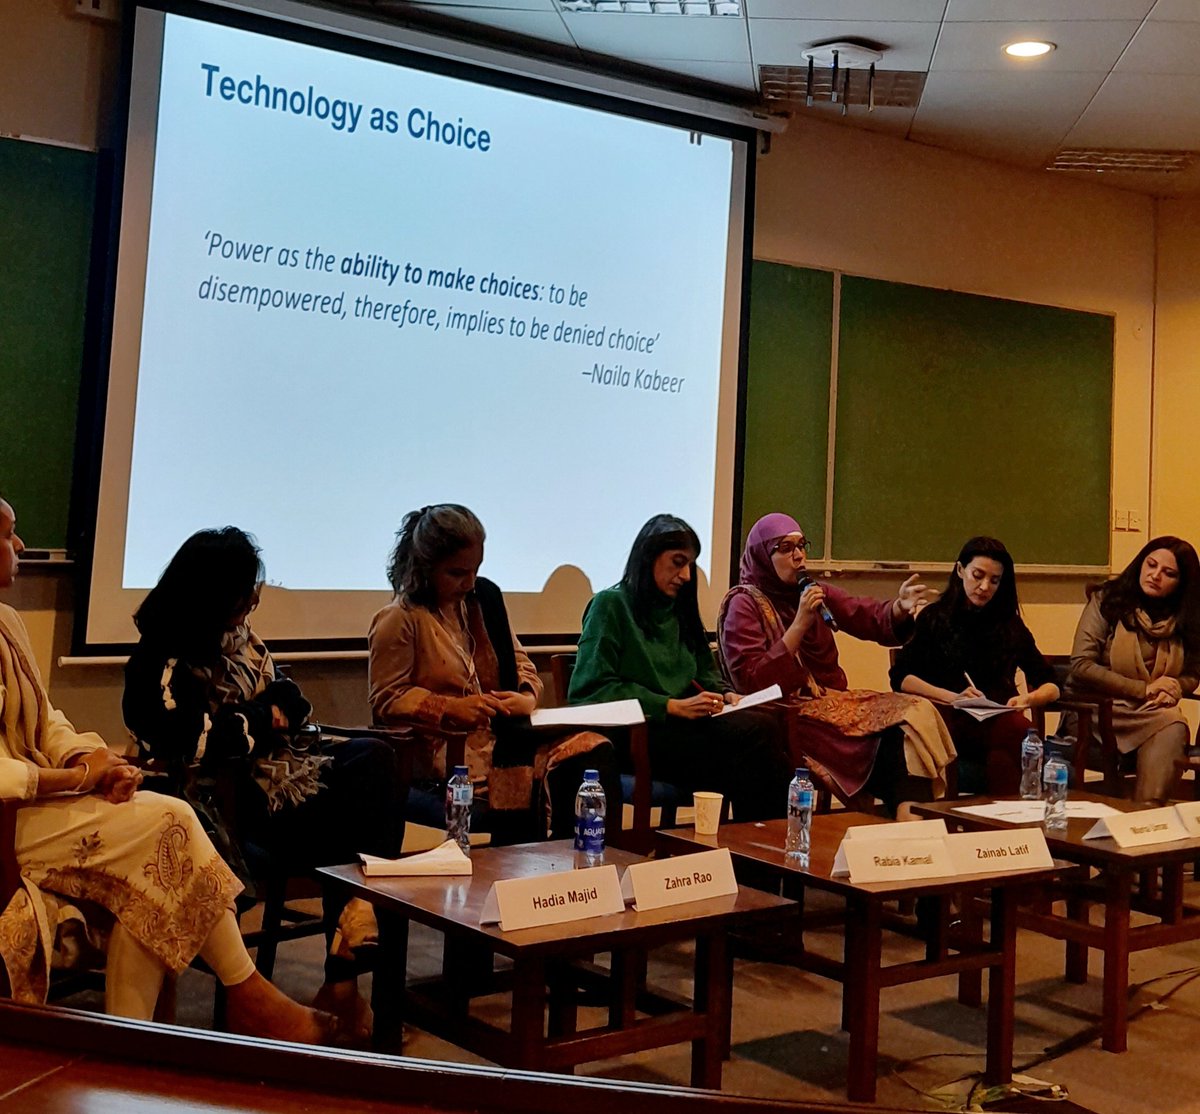 Highlights of the #Path2Dev -  conferences are needed -thanks @HaqMahbub @IDEASpak @CDPRPak @CERPakistan @IGC_Pakistan - I got to meet reseachers, thinkers and people doing some great work in our communities locally& internationally. When we work together,  we see a change.